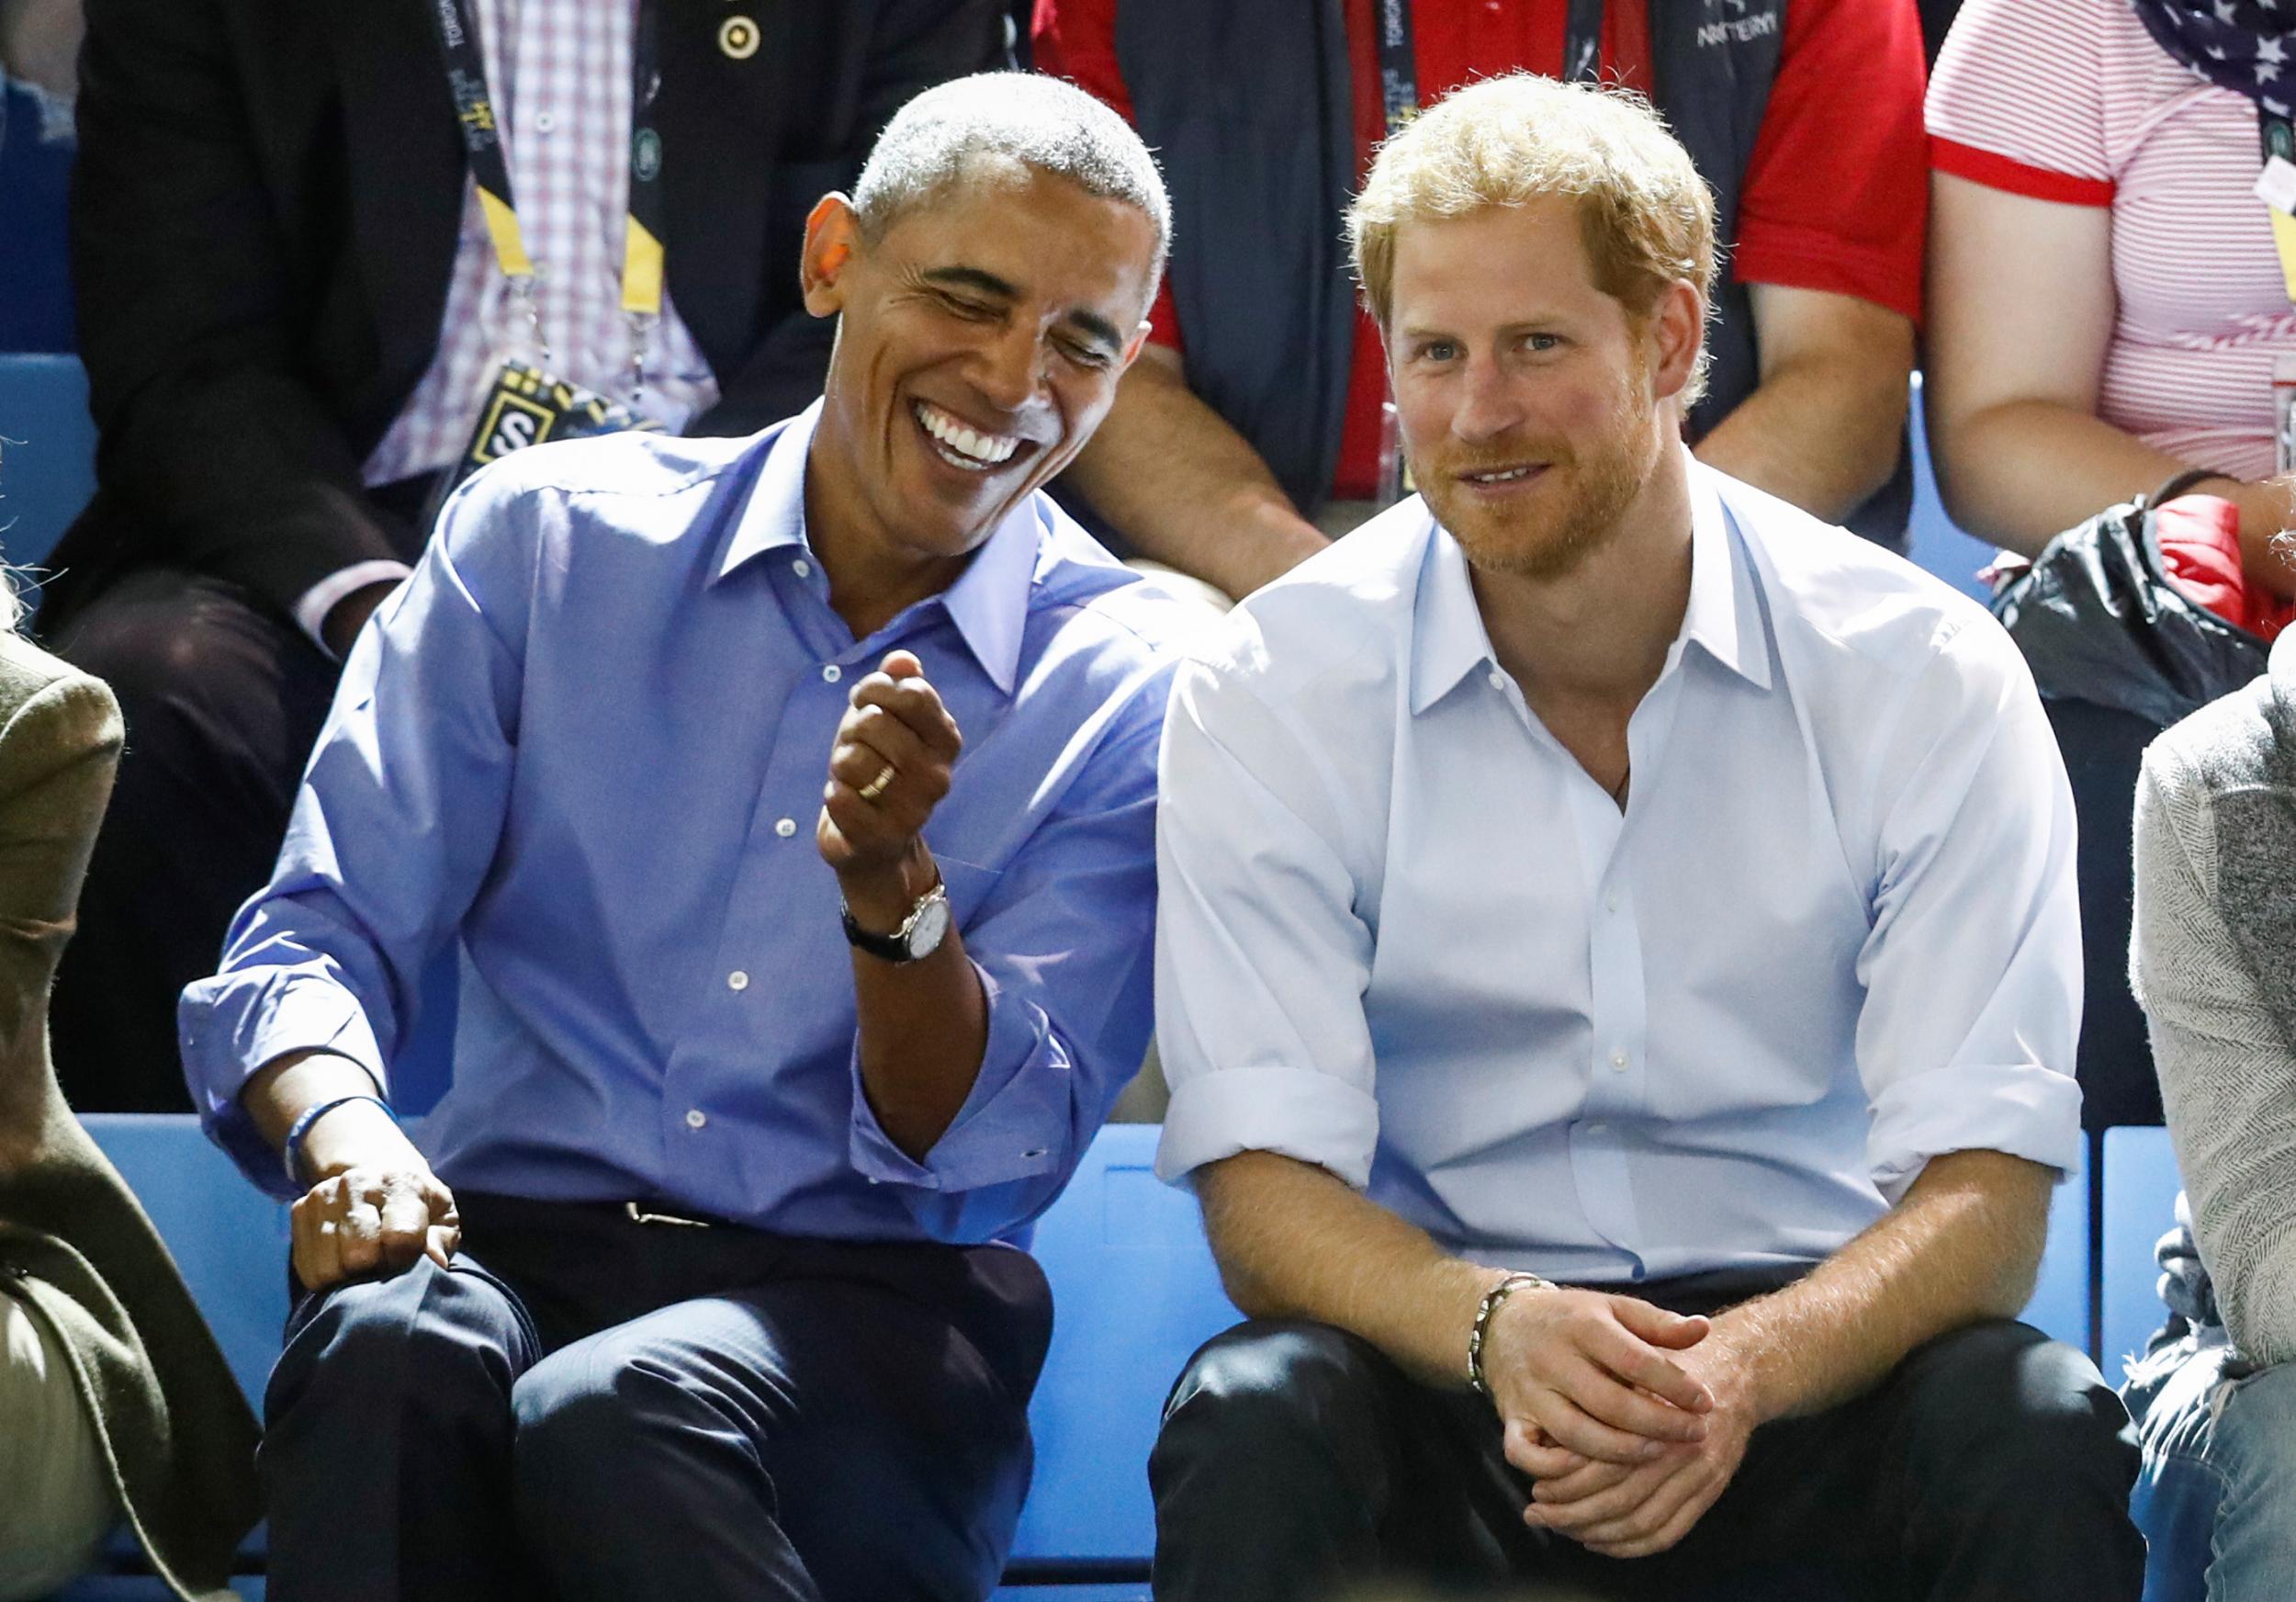 Barack Obama and Prince Harry share a joke during the Invictus Games